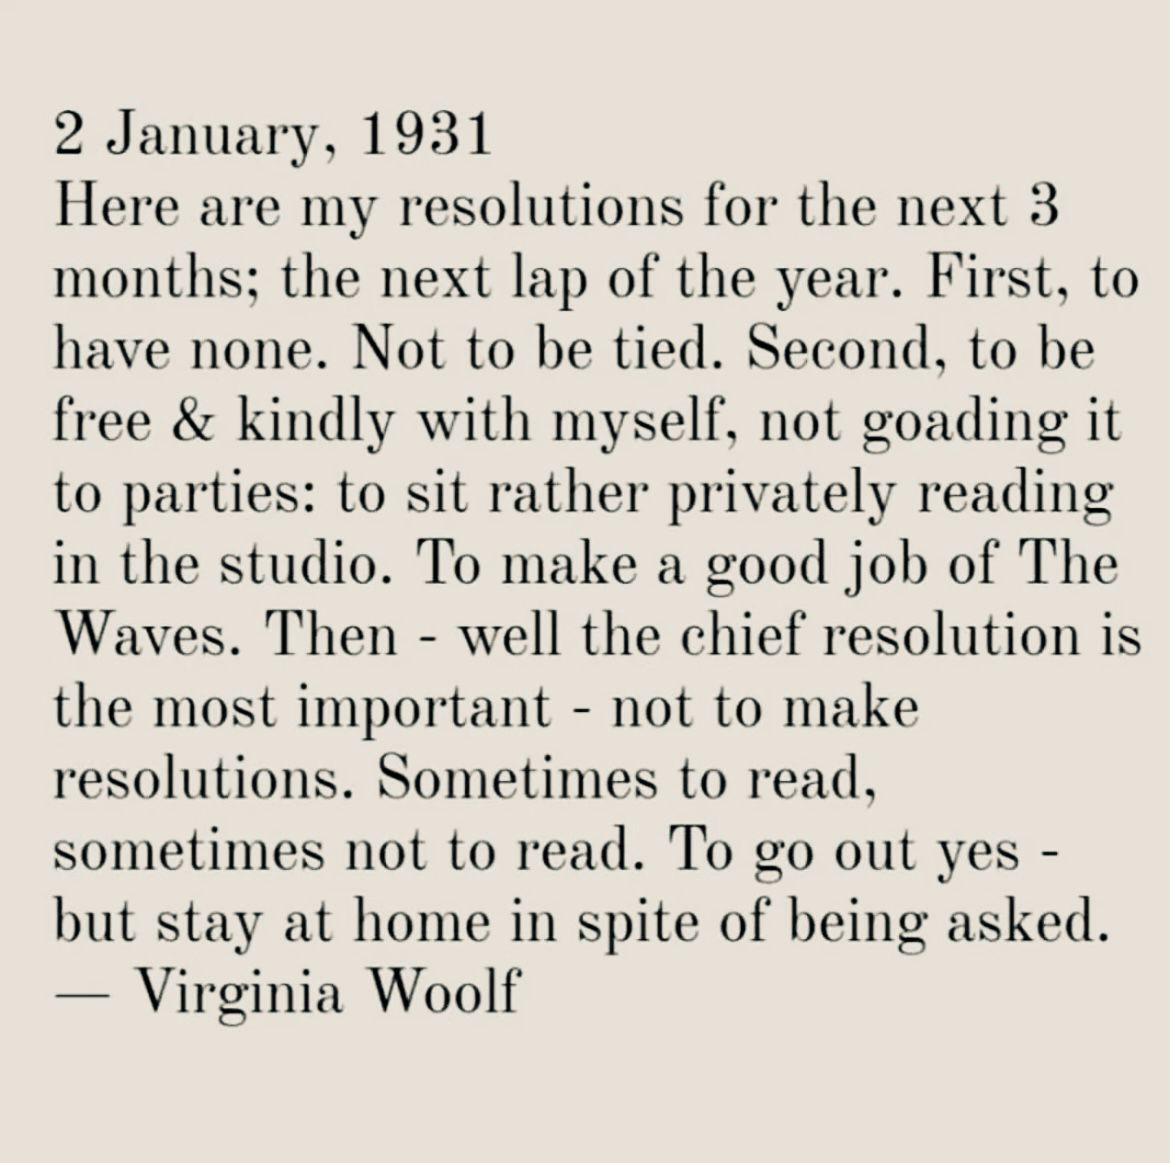 We couldn't agree more Virginia! Always with snippets of genius for today. Happy new year all, we can't wait to bring you our new show, which will be happening very soon indeed! @VirginiaWoolfGB #janeausten #ladysusan #literature #femalewriters #feminism #theatre #newshow